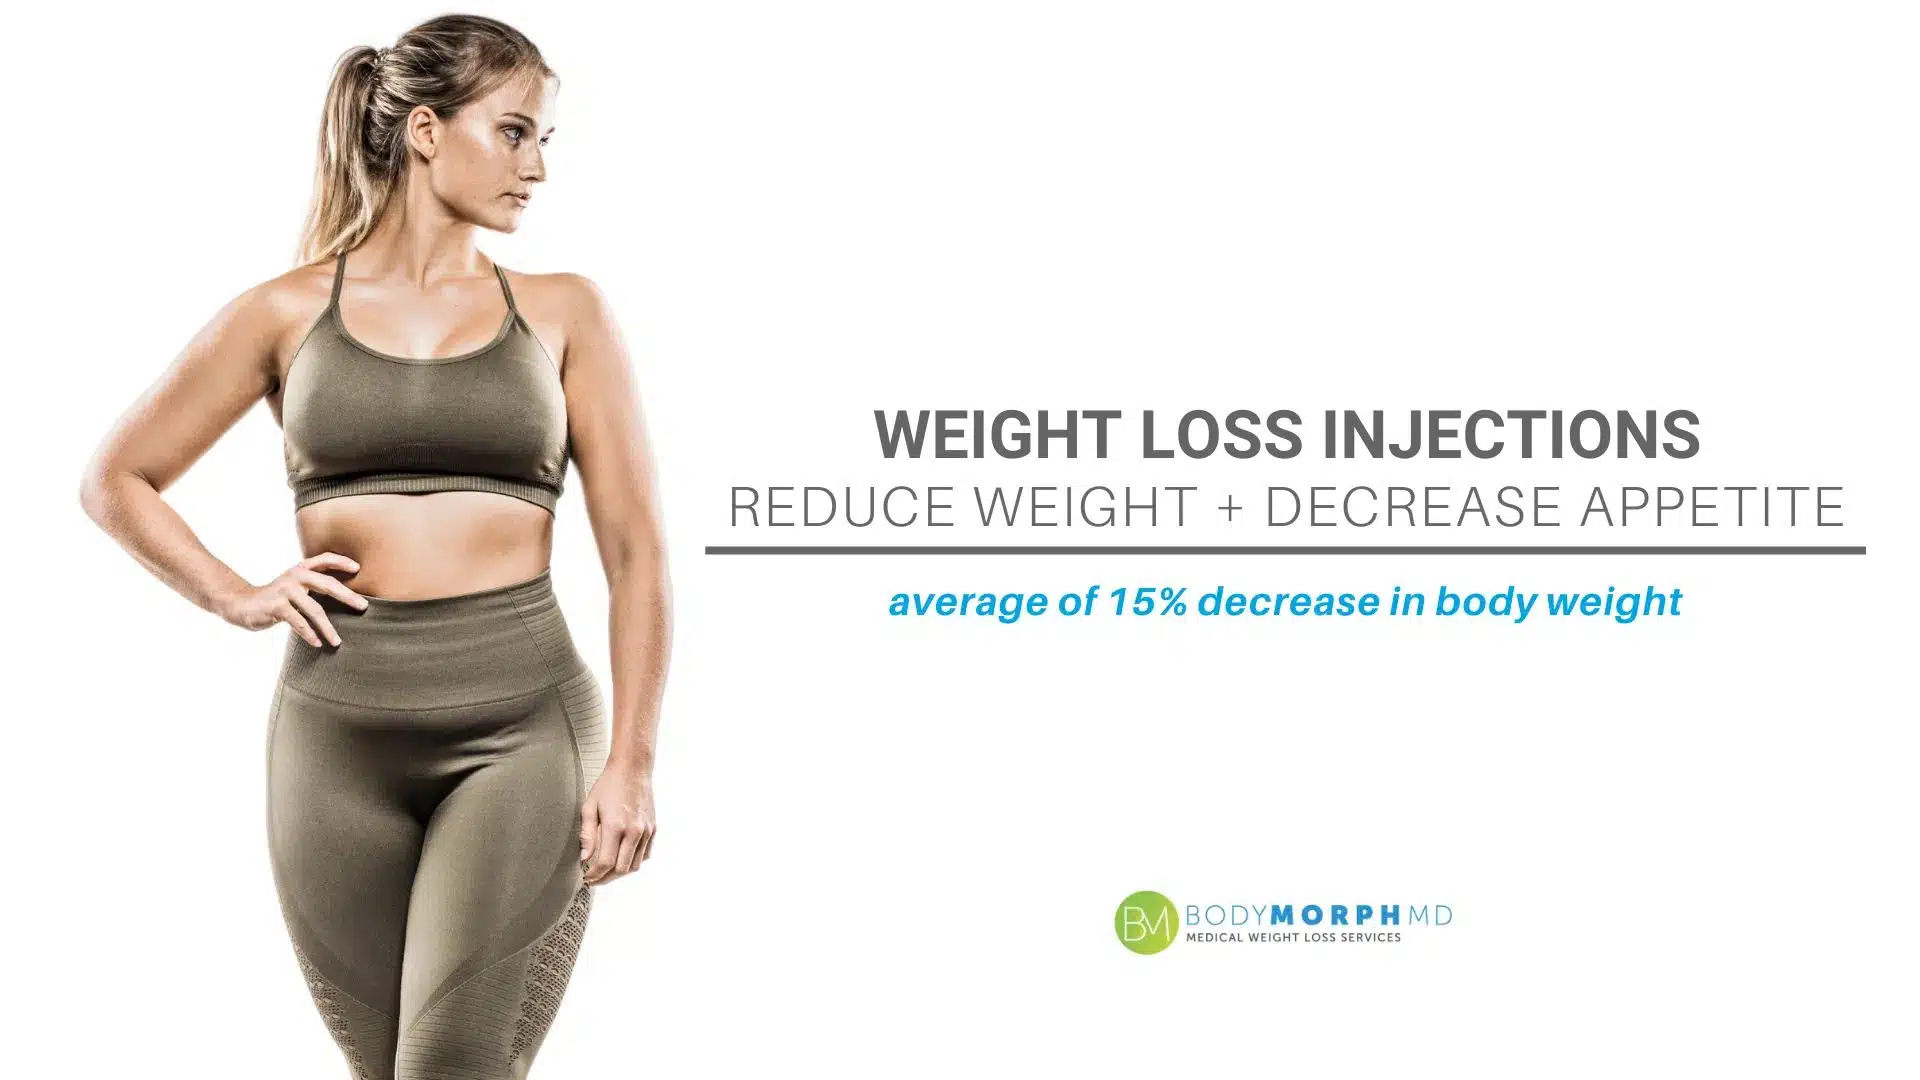 Body positive woman promoting Weight loss injections offered at Body Morph MD in Naples, FL